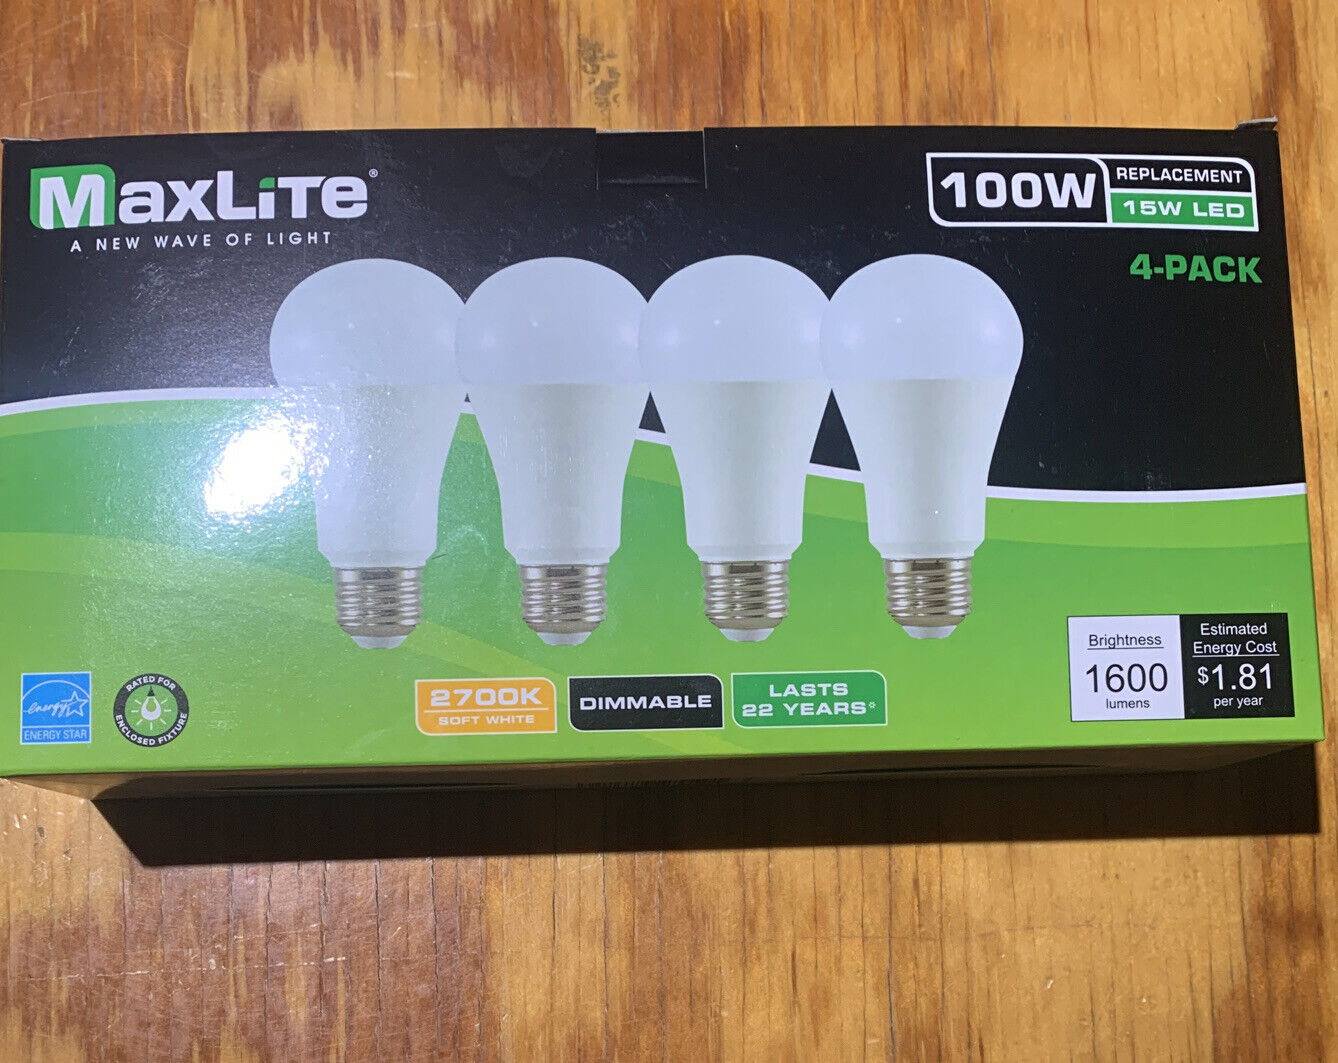 4 Light Bulbs 15W LED  100W Replacement CLF Bulb Soft White 2700k Dimmable E26